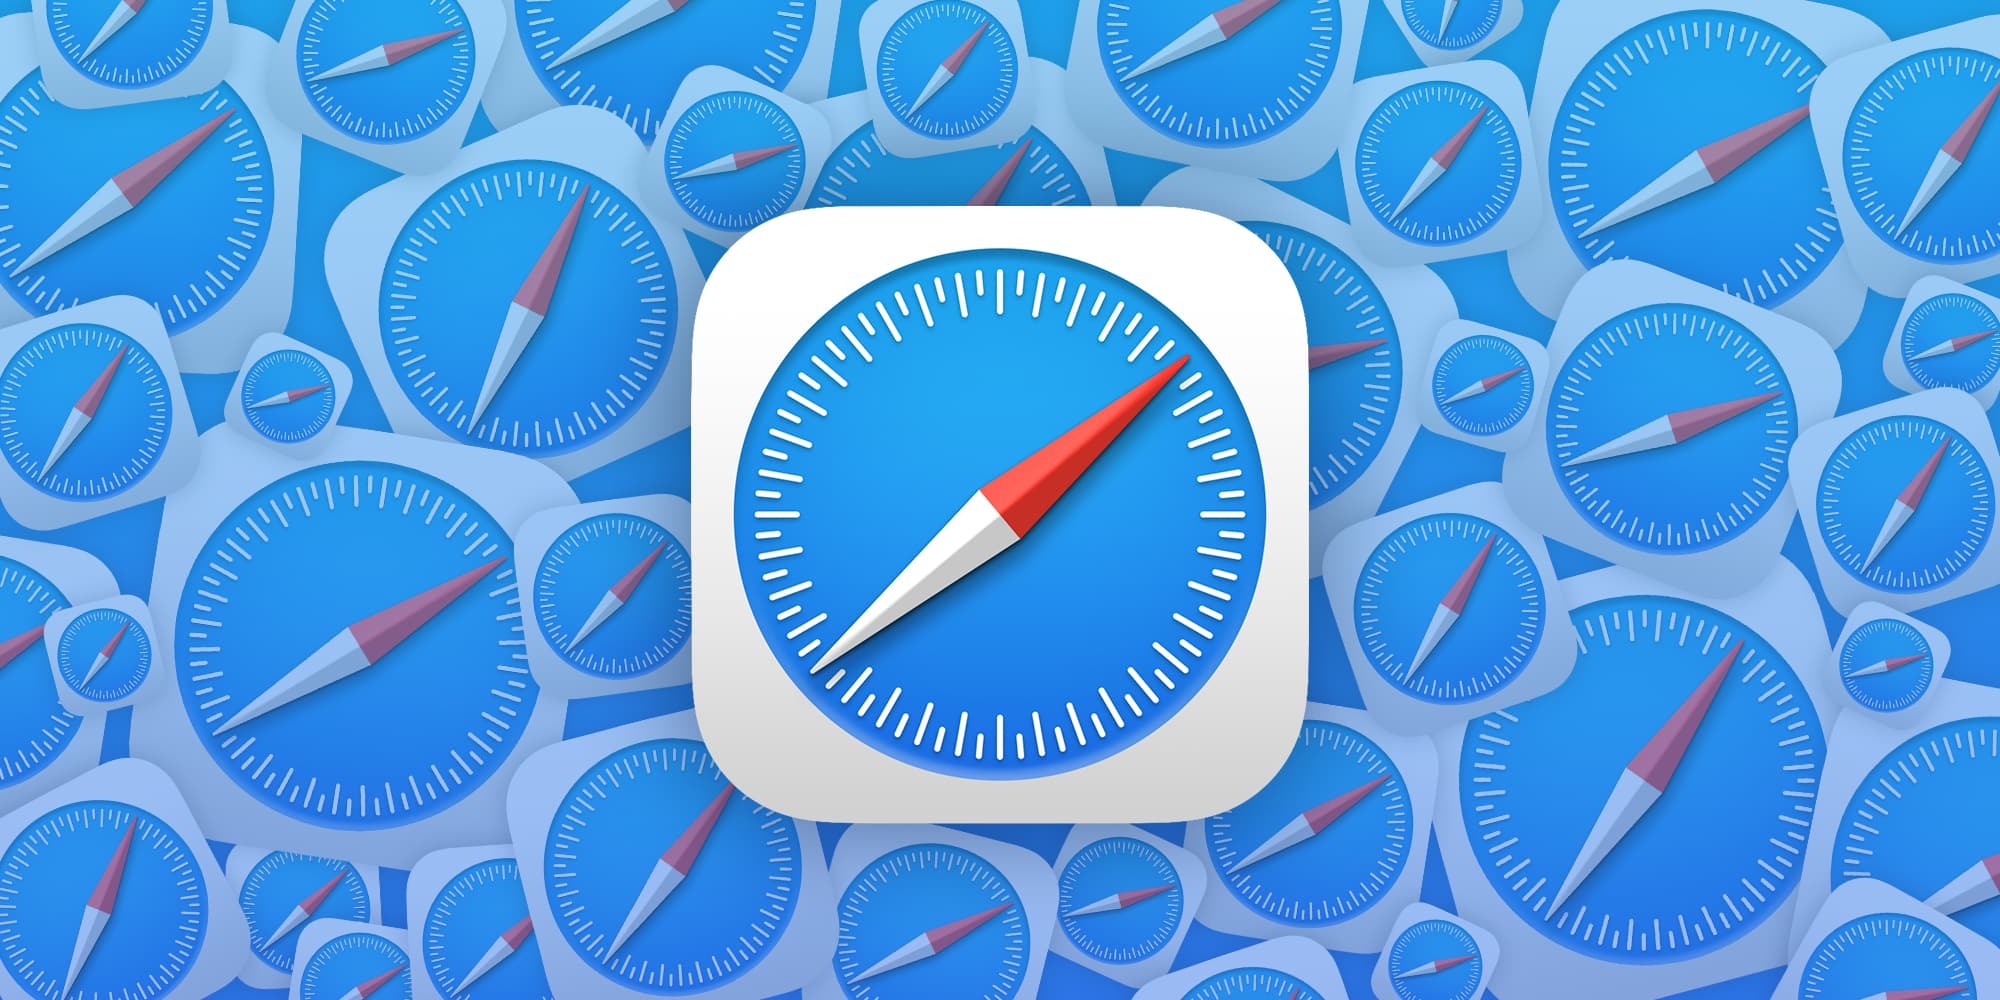 How to Use Safari Extensions on the iPhone, iPad, or iPod Touch